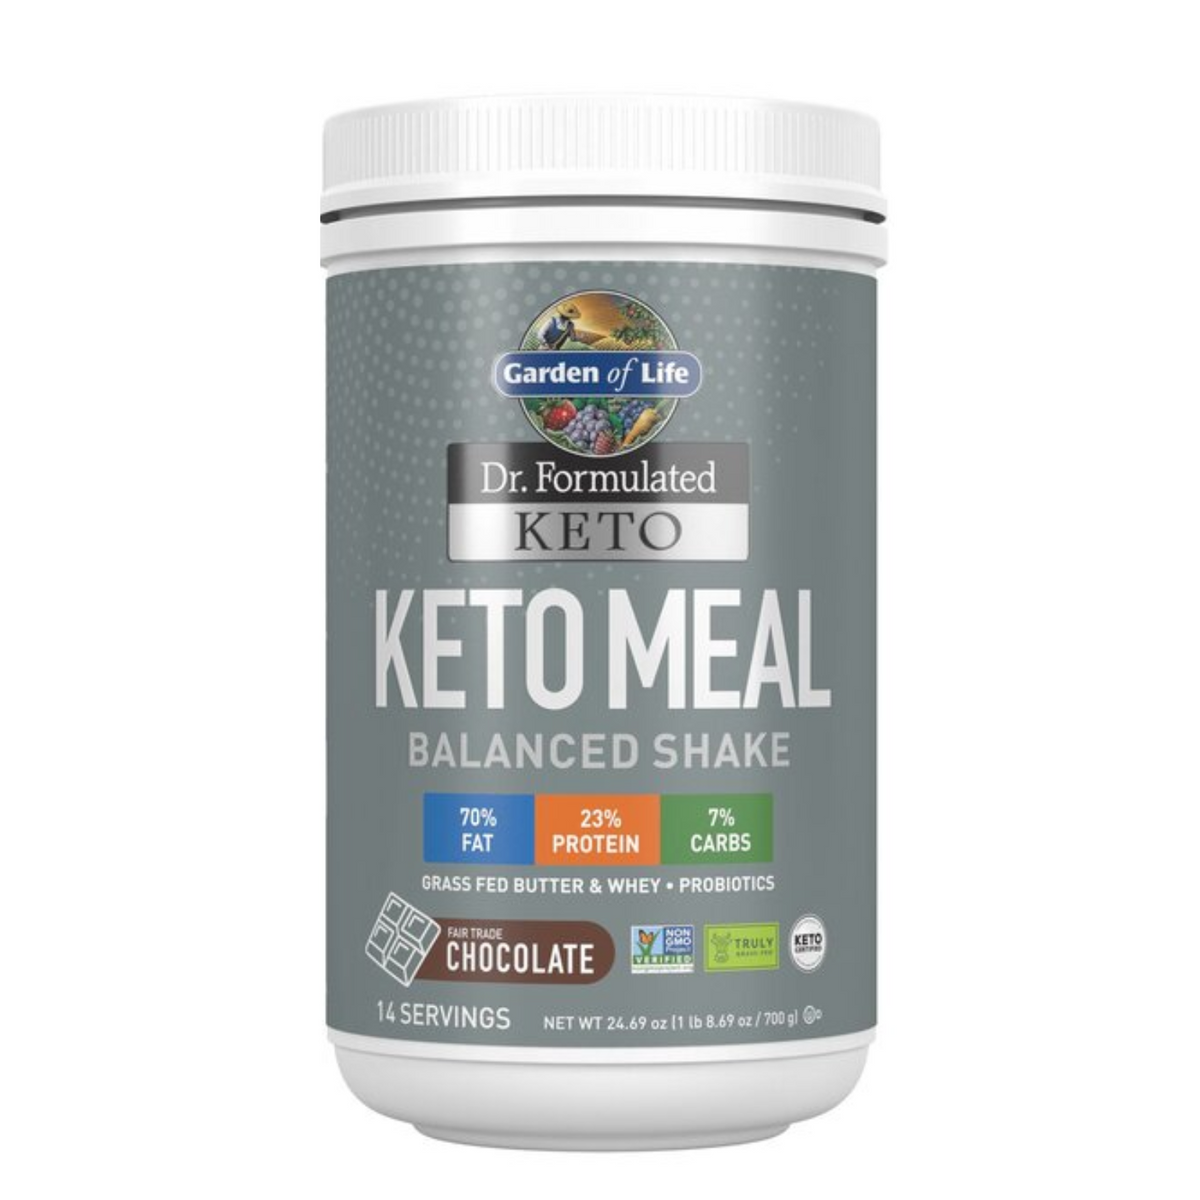 Dr. Formulated Keto Meal - 700 grams By Garden of Life